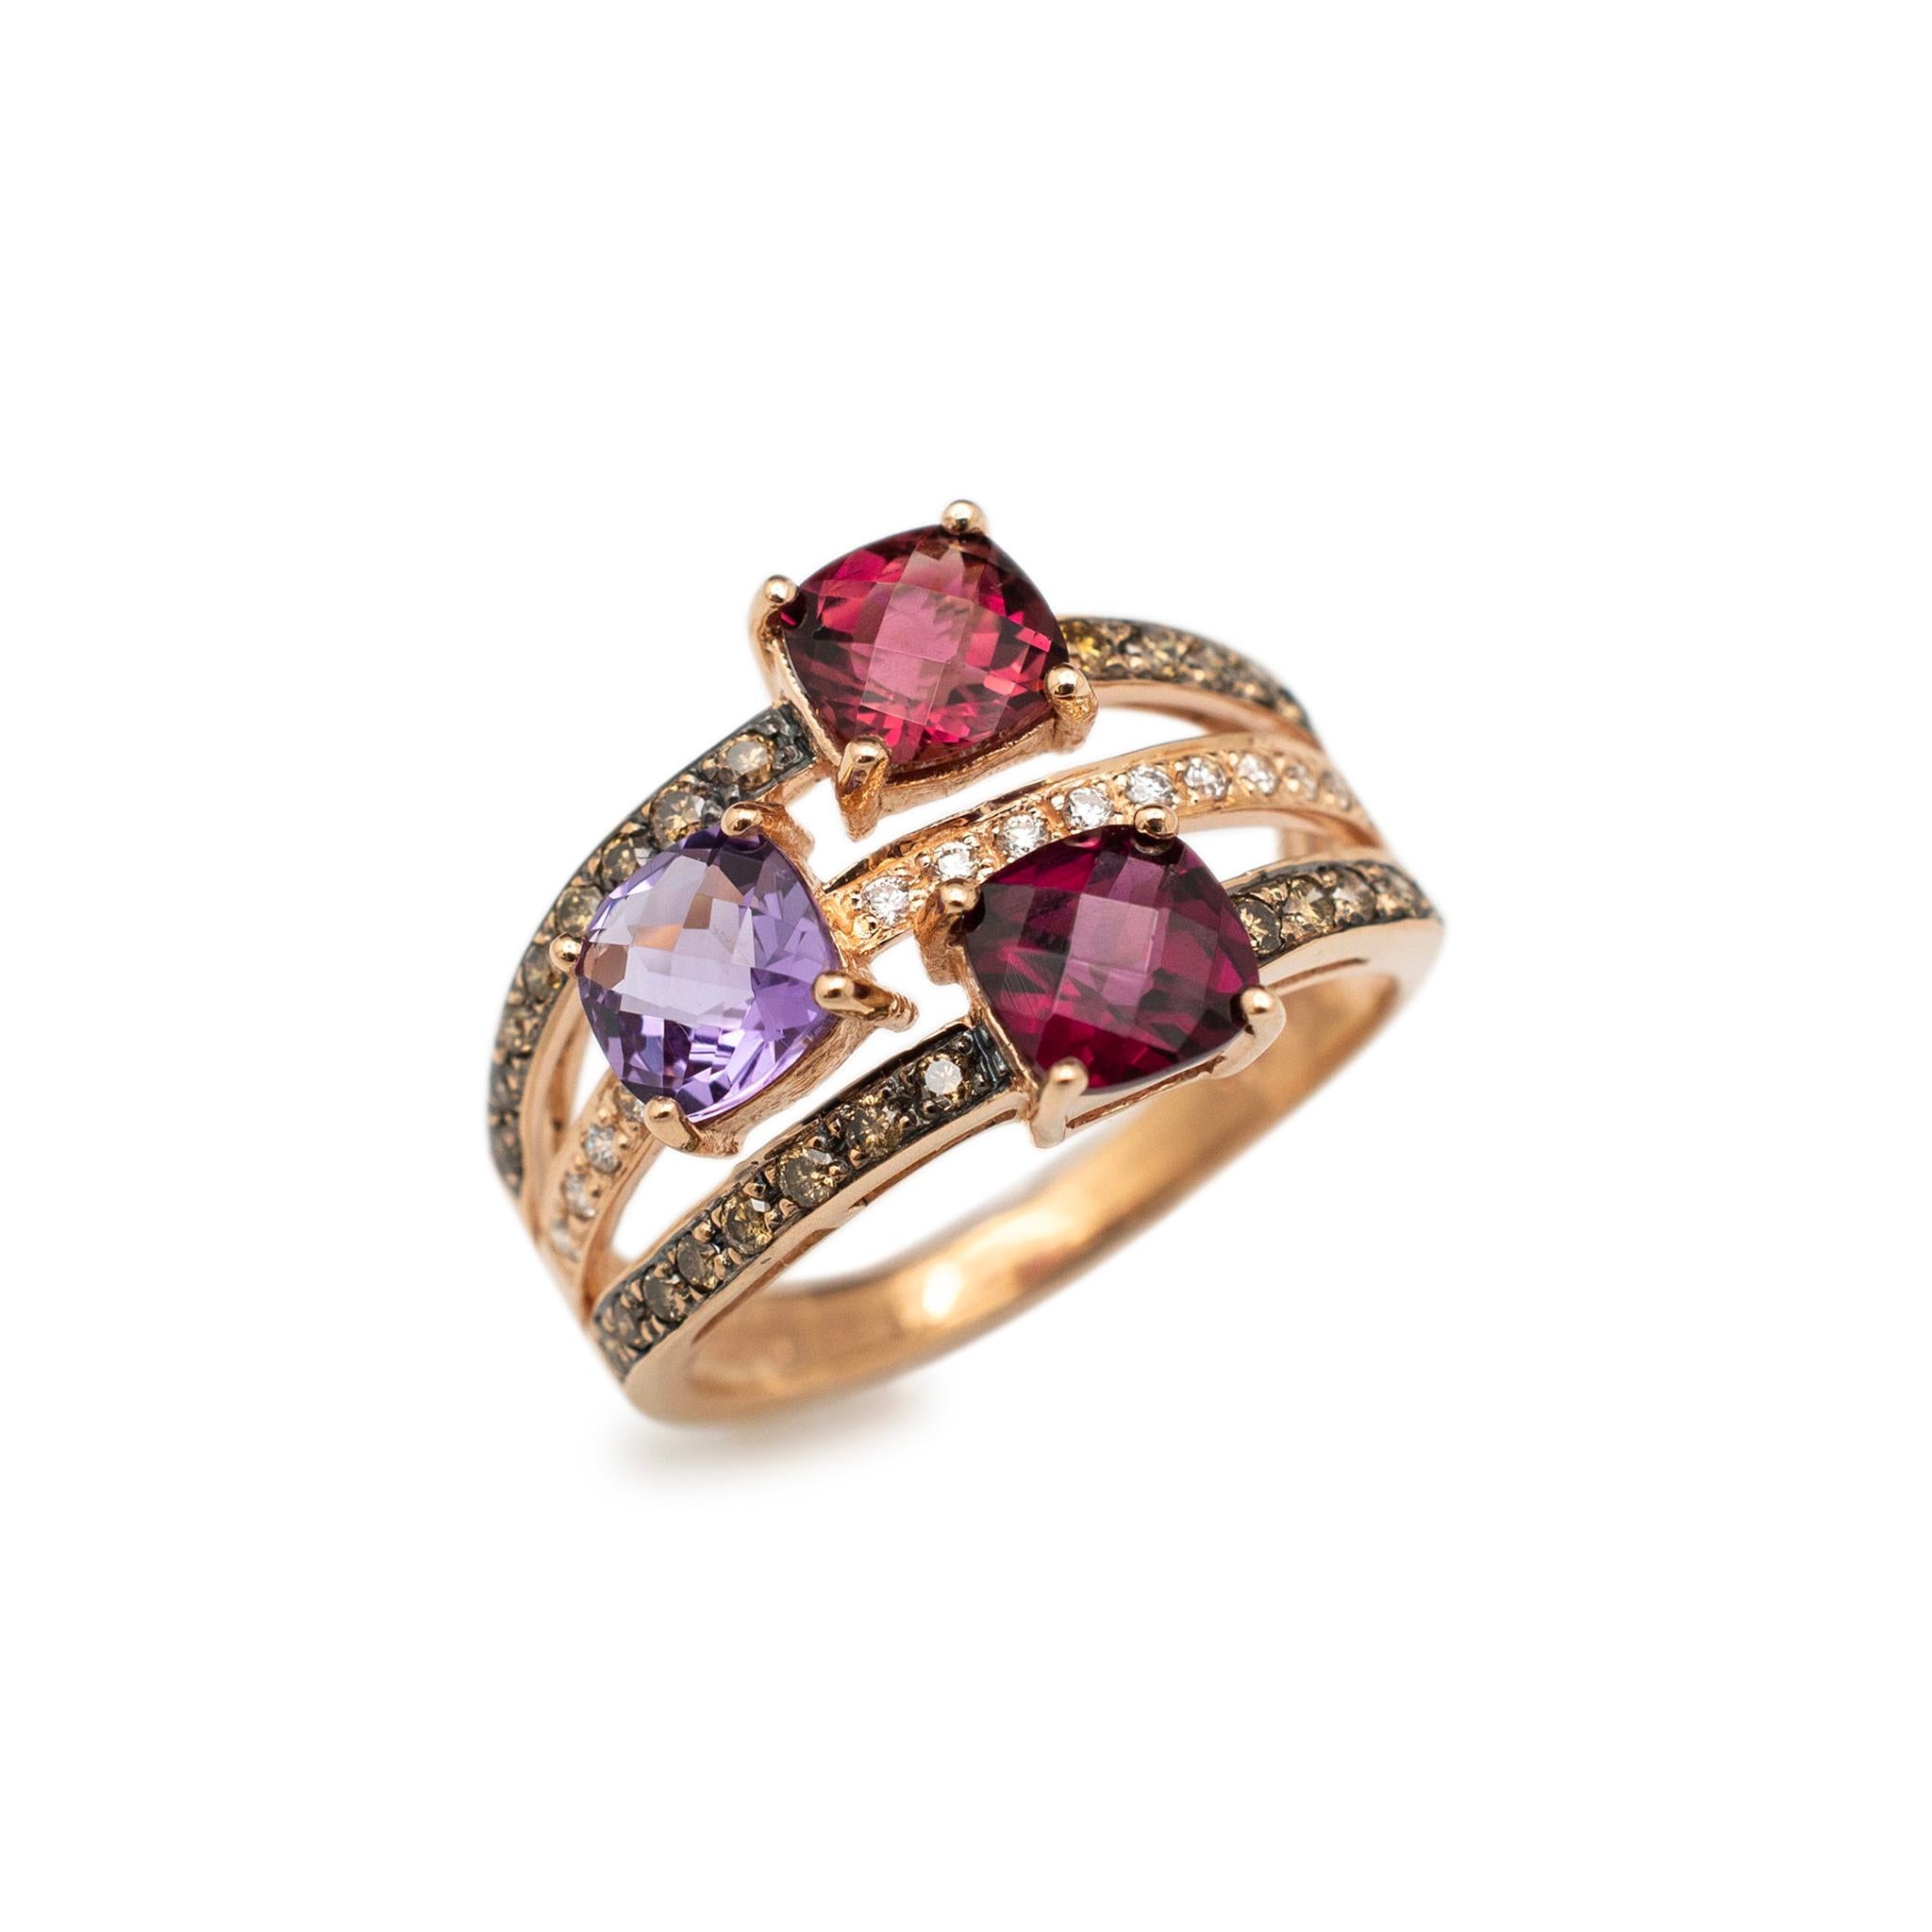 Brand: Levian

Gender: Ladies

Metal Type: 14K Rose Gold

Size: 9

Shank Maximum Width: 14.80 mm tapering to 2.50 mm

Weight: 5.69 grams

Ladies 14K rose gold diamond tourmaline and rhodolite garnet cocktail ring with a tapered comfort-fit shank.